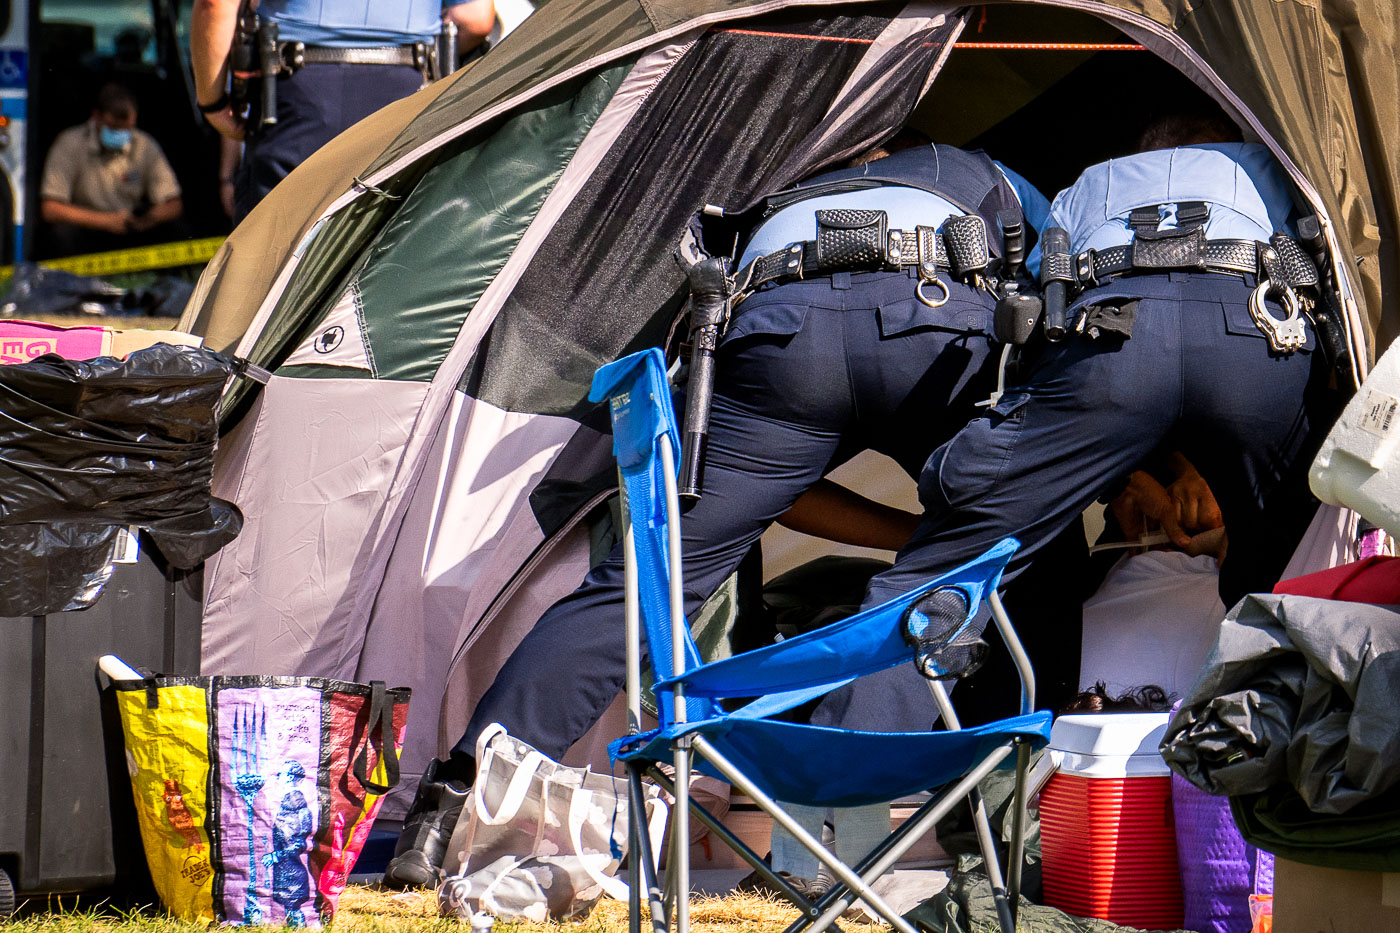 Police officers handcuffing people living in tents in Minneapolis